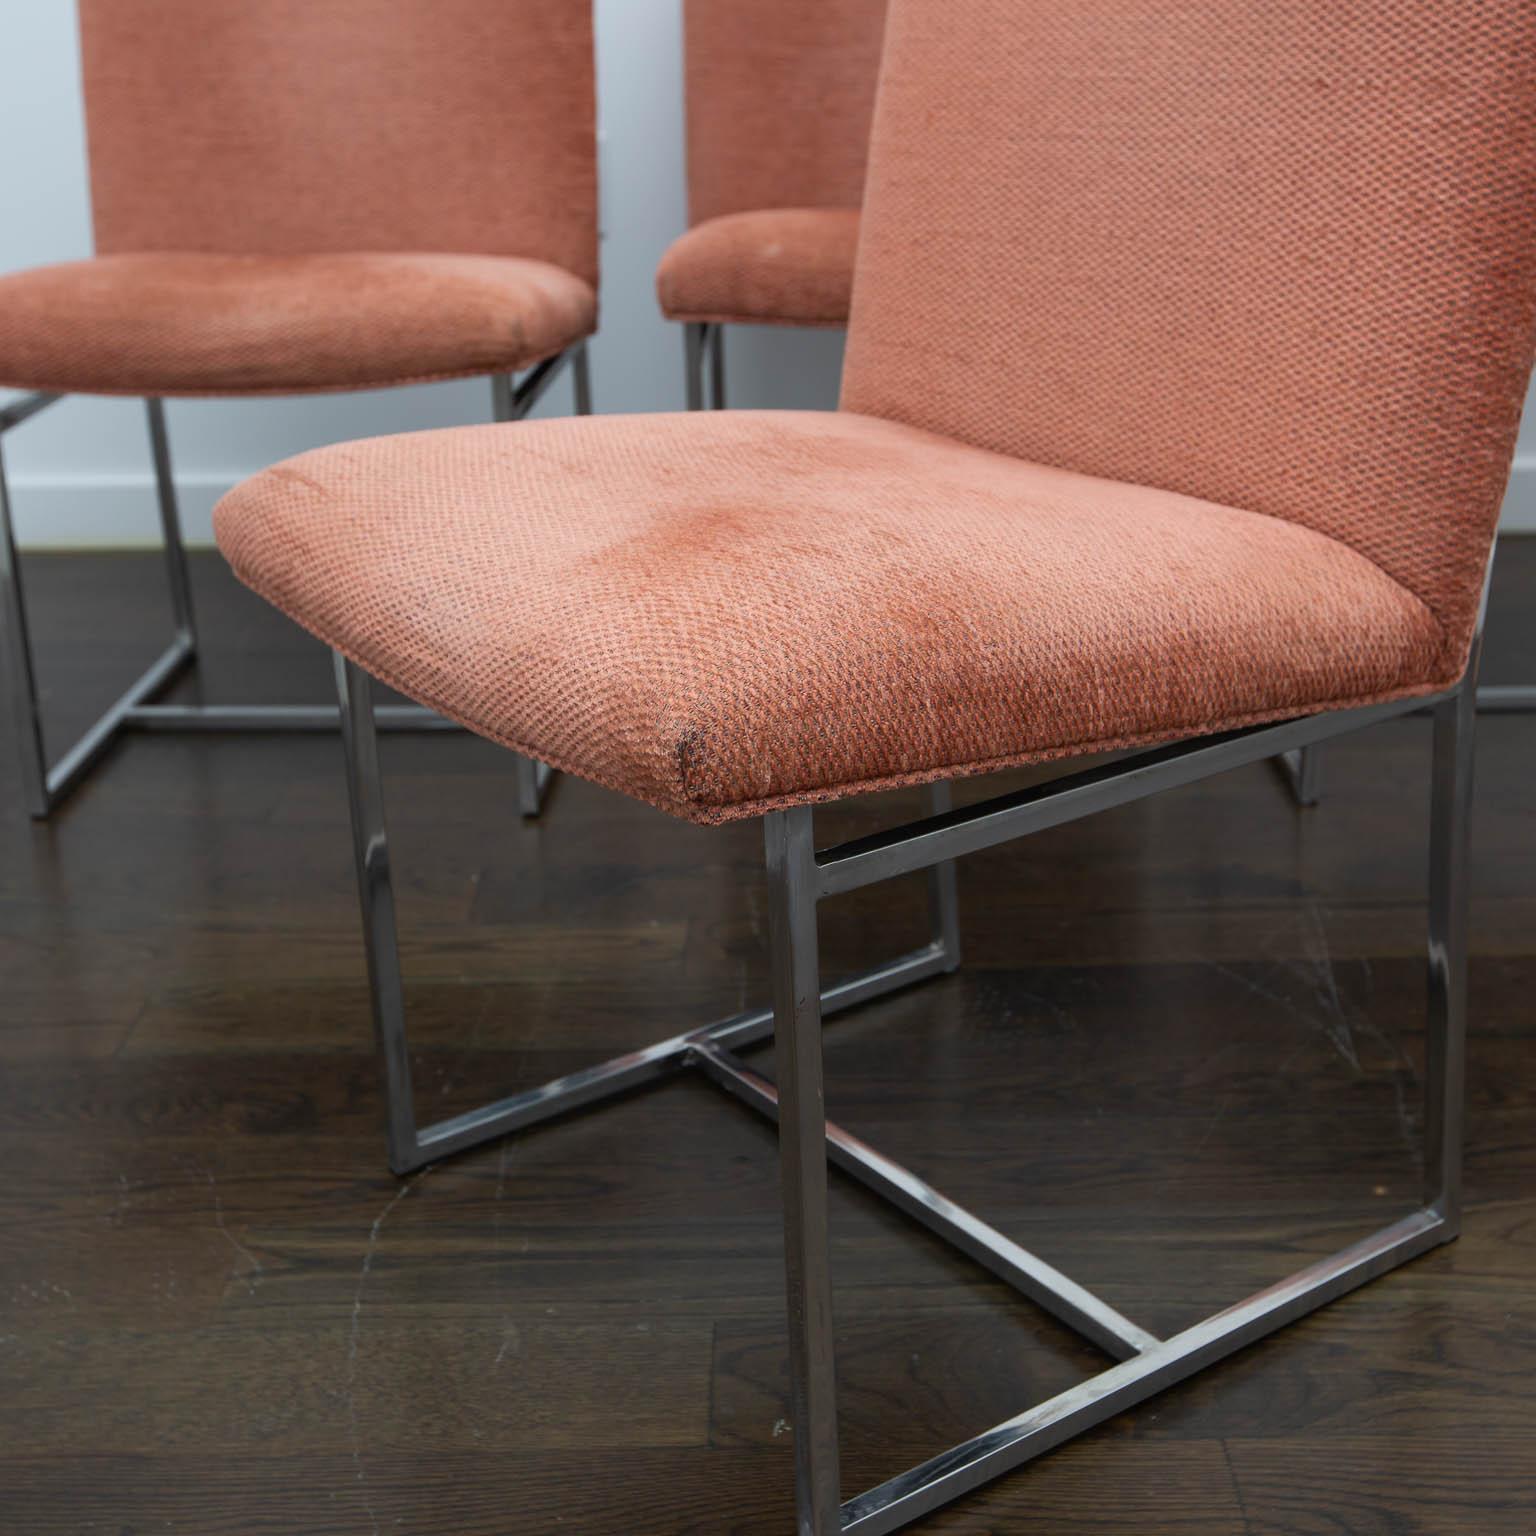 Nice vintage set with clean, light-salmon colored chenille fabric. Close in style to the Milo Baughman chair done for Thayer Coggin.